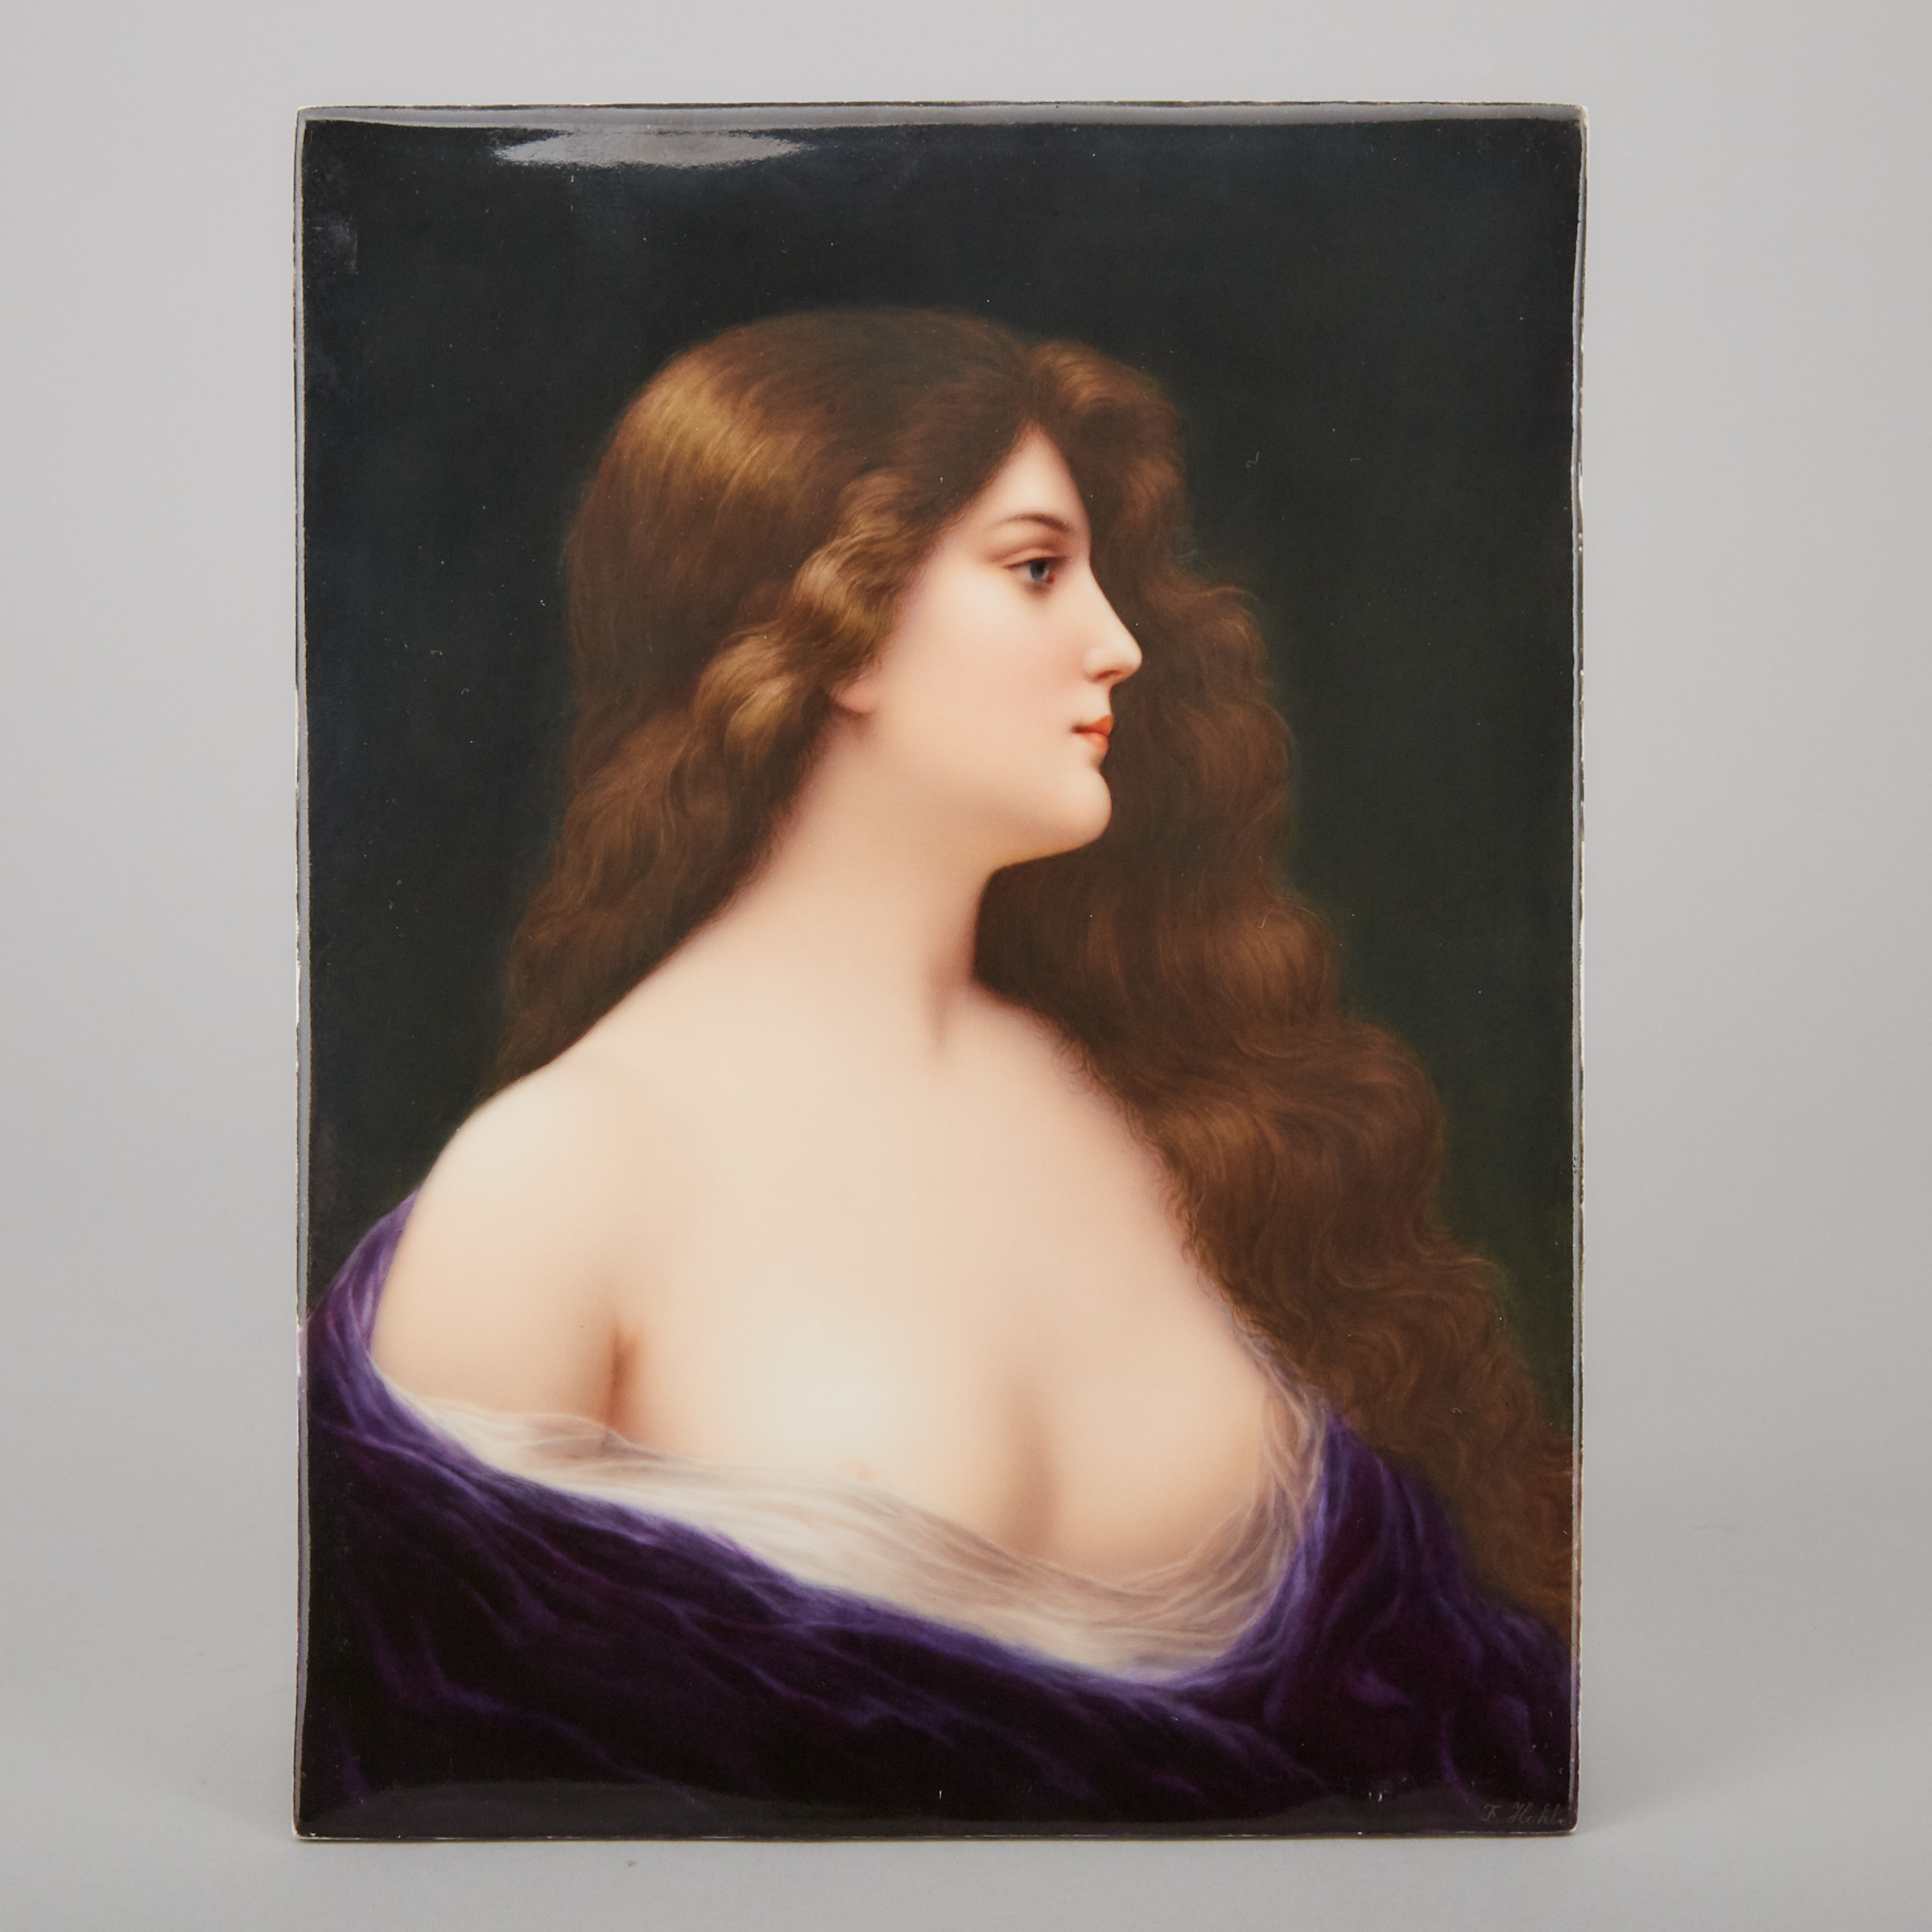 Berlin Rectangular Portrait Plaque of a Young Woman, F. Hohle, after Angelo Asti, c.1900